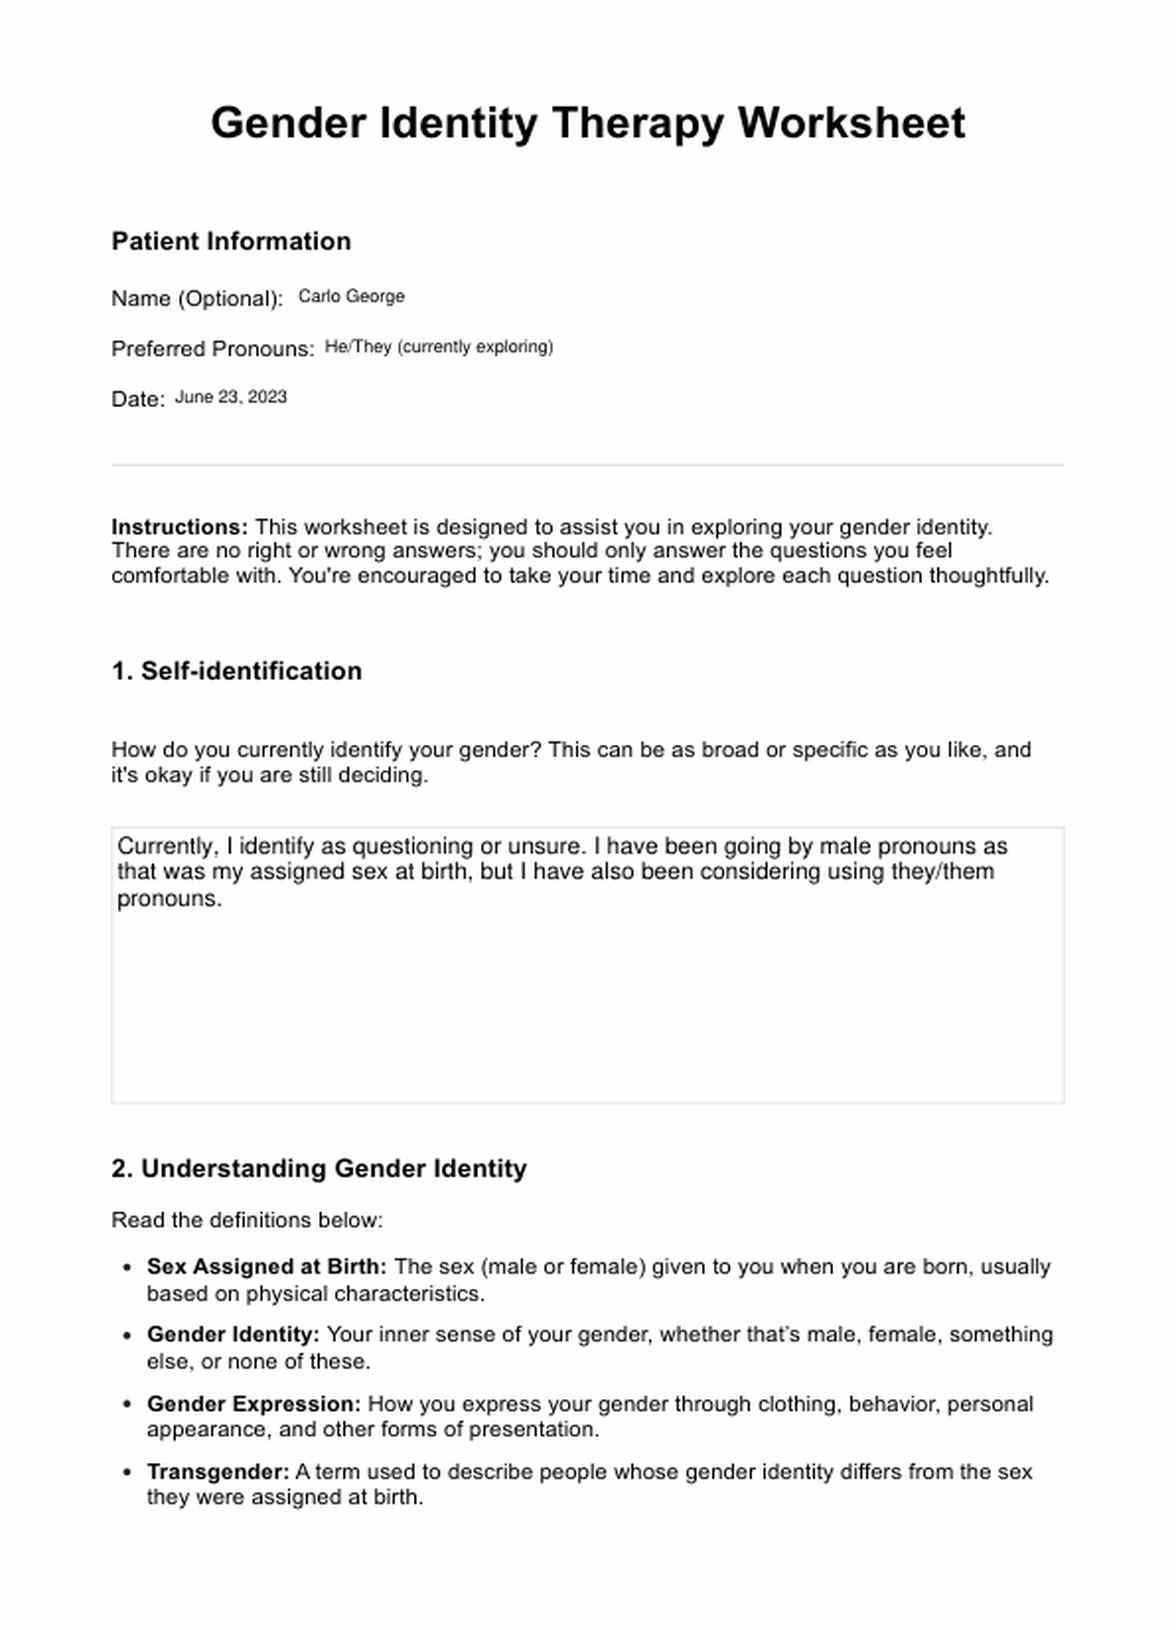 Gender Identity Therapy Worksheet PDF Example